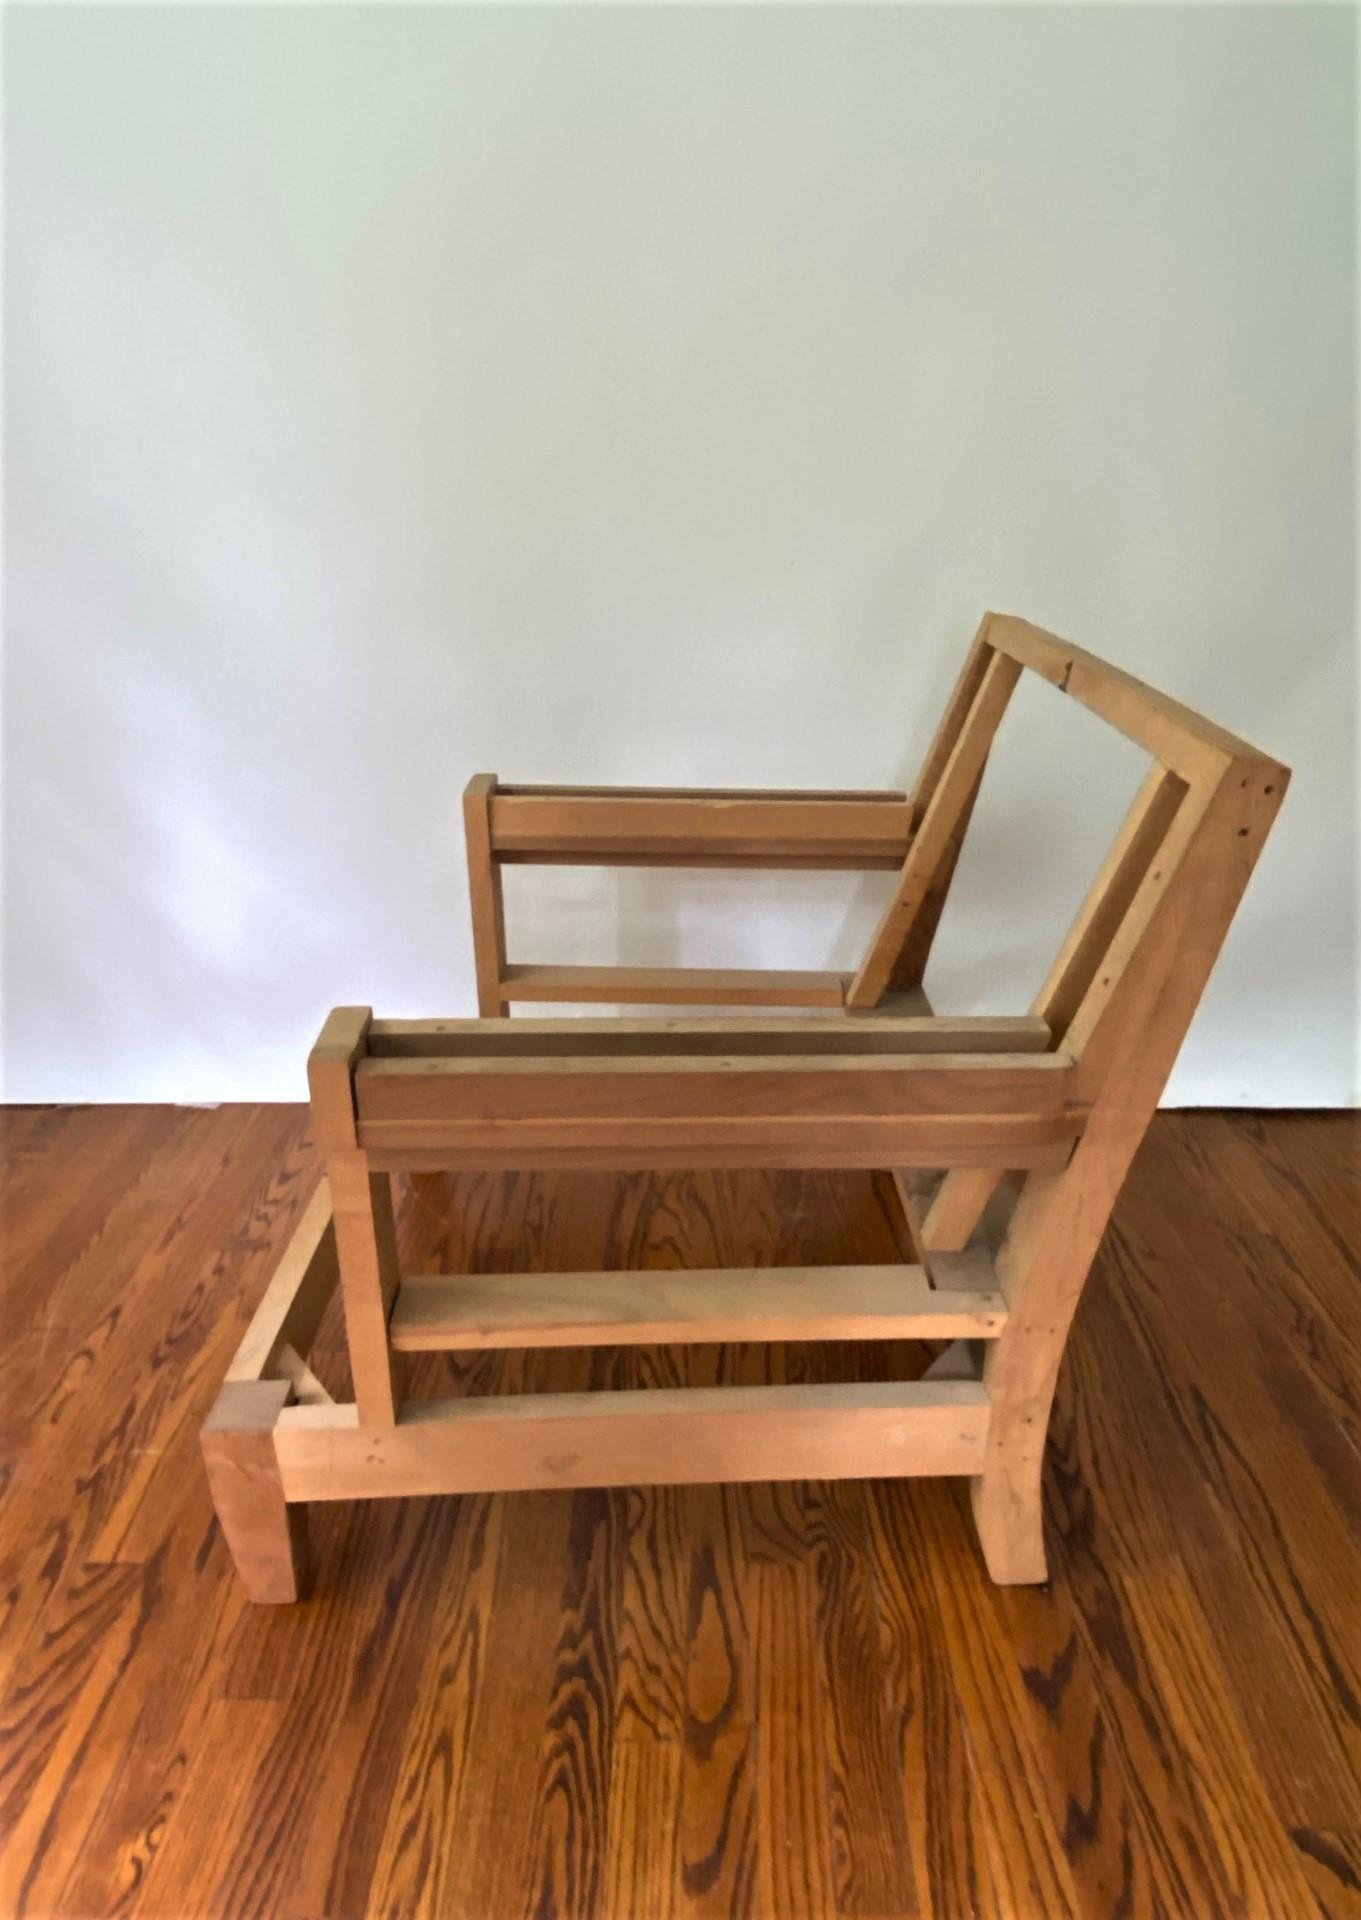 19th Century New Kiln-Dried Maple Lawson Style Lounge Chair Frame with Mahogany Legs. For Sale